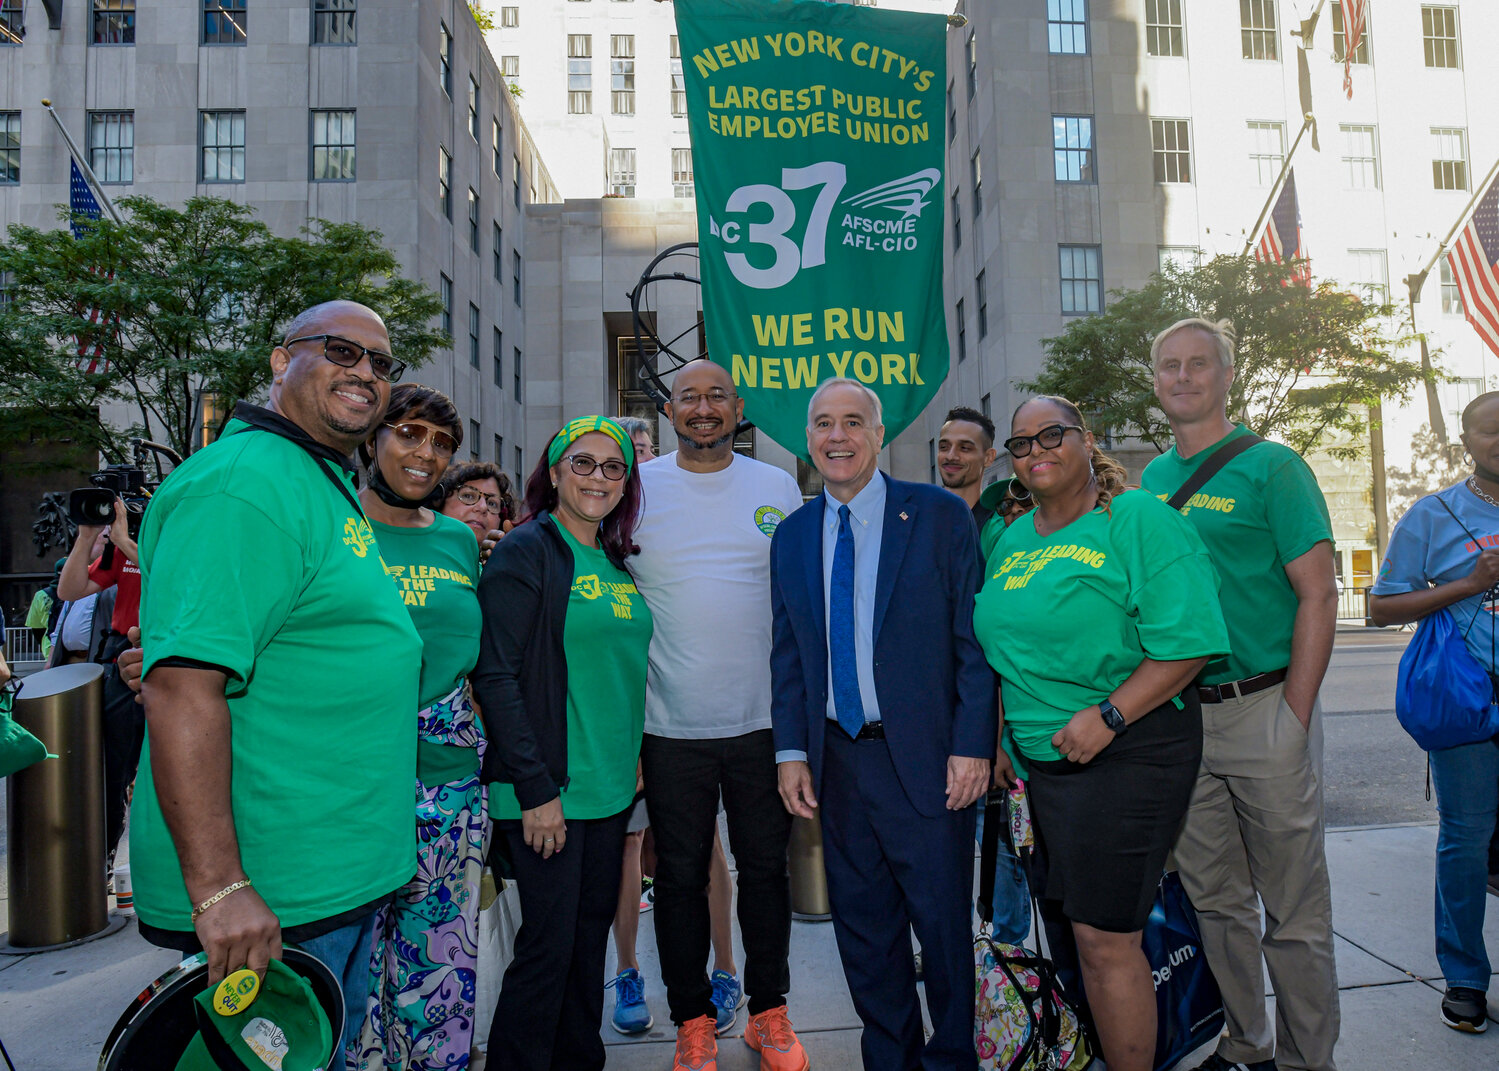 State Comptroller Thomas DiNapoli joined with District Council 37 Executive Director Henry Garrido and union members during the 2022 New York City Central Labor Council's Labor Day Parade. In a recent op-ed, DiNapoli warned that the city's budget gap could grow to as much as $13.8 billion next year, not just because of the migrant crisis, but because of the city's labor agreements, rising overtime spending and a growing number of unfunded programs.